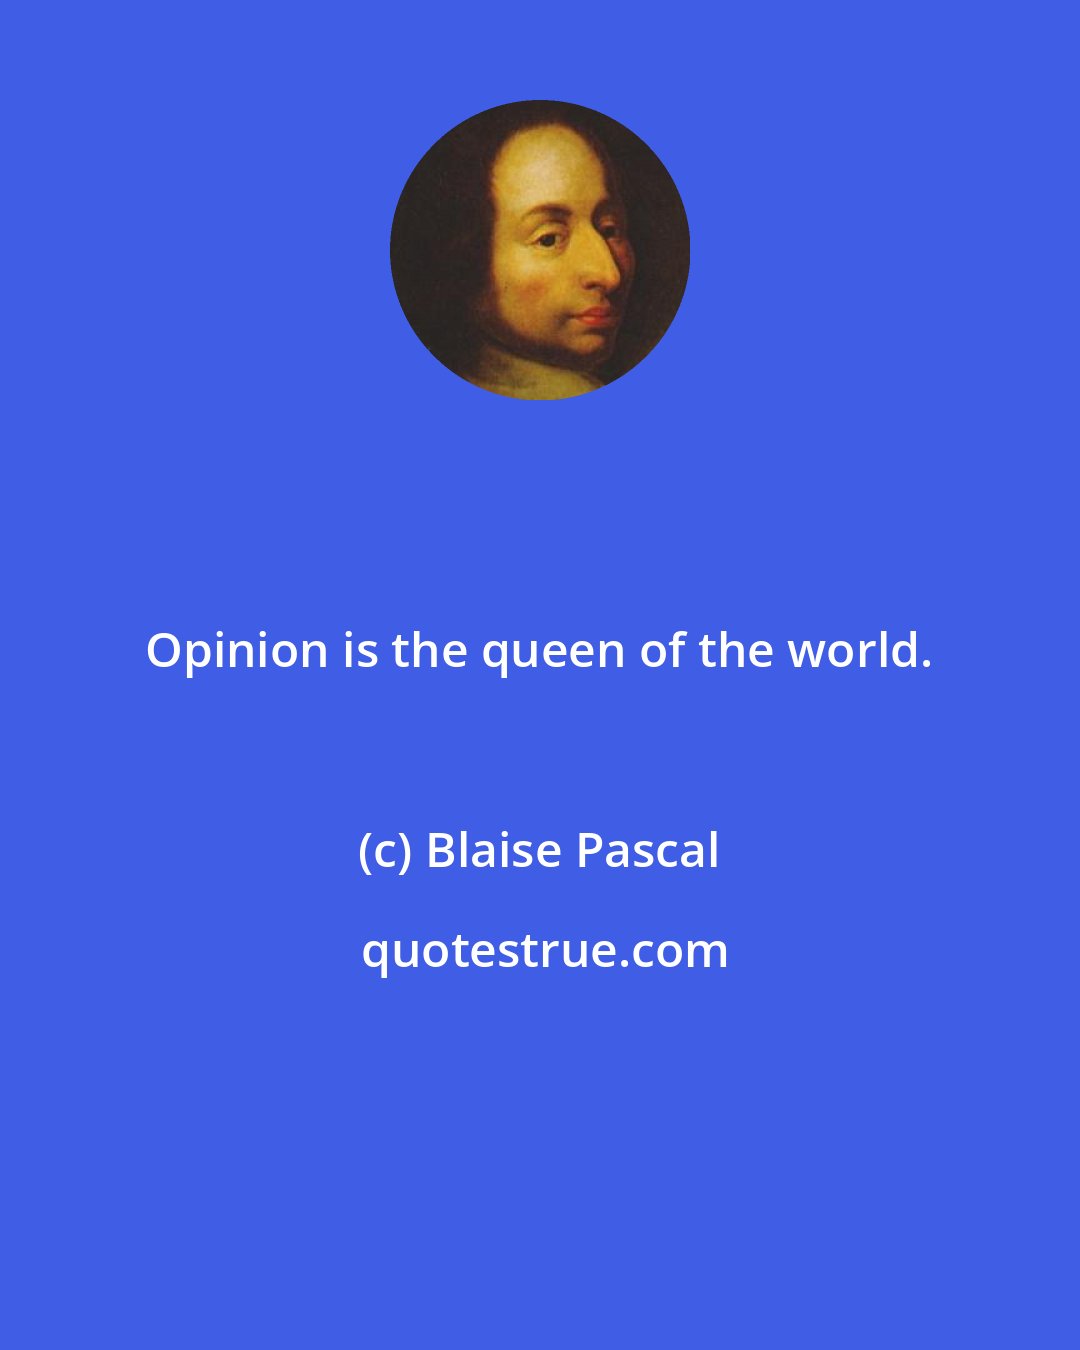 Blaise Pascal: Opinion is the queen of the world.